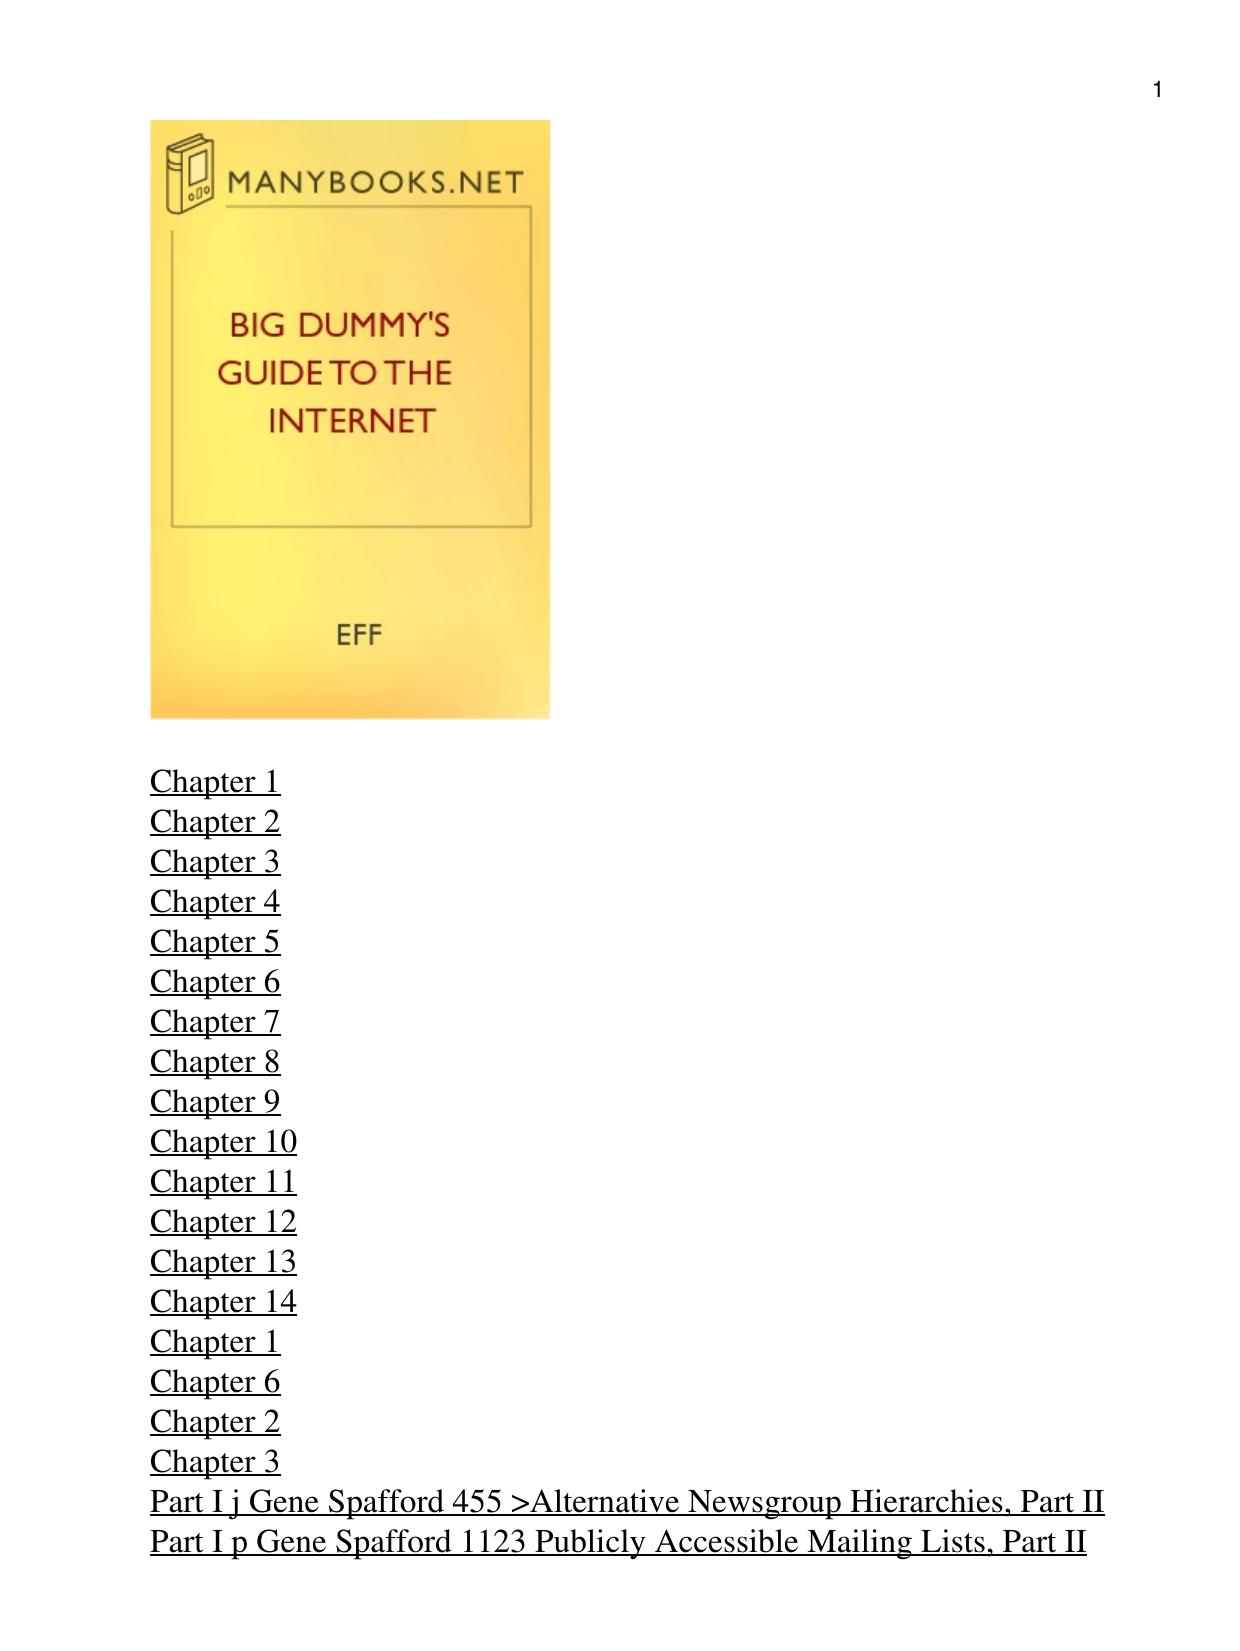 Big Dummy's Guide to the Internet